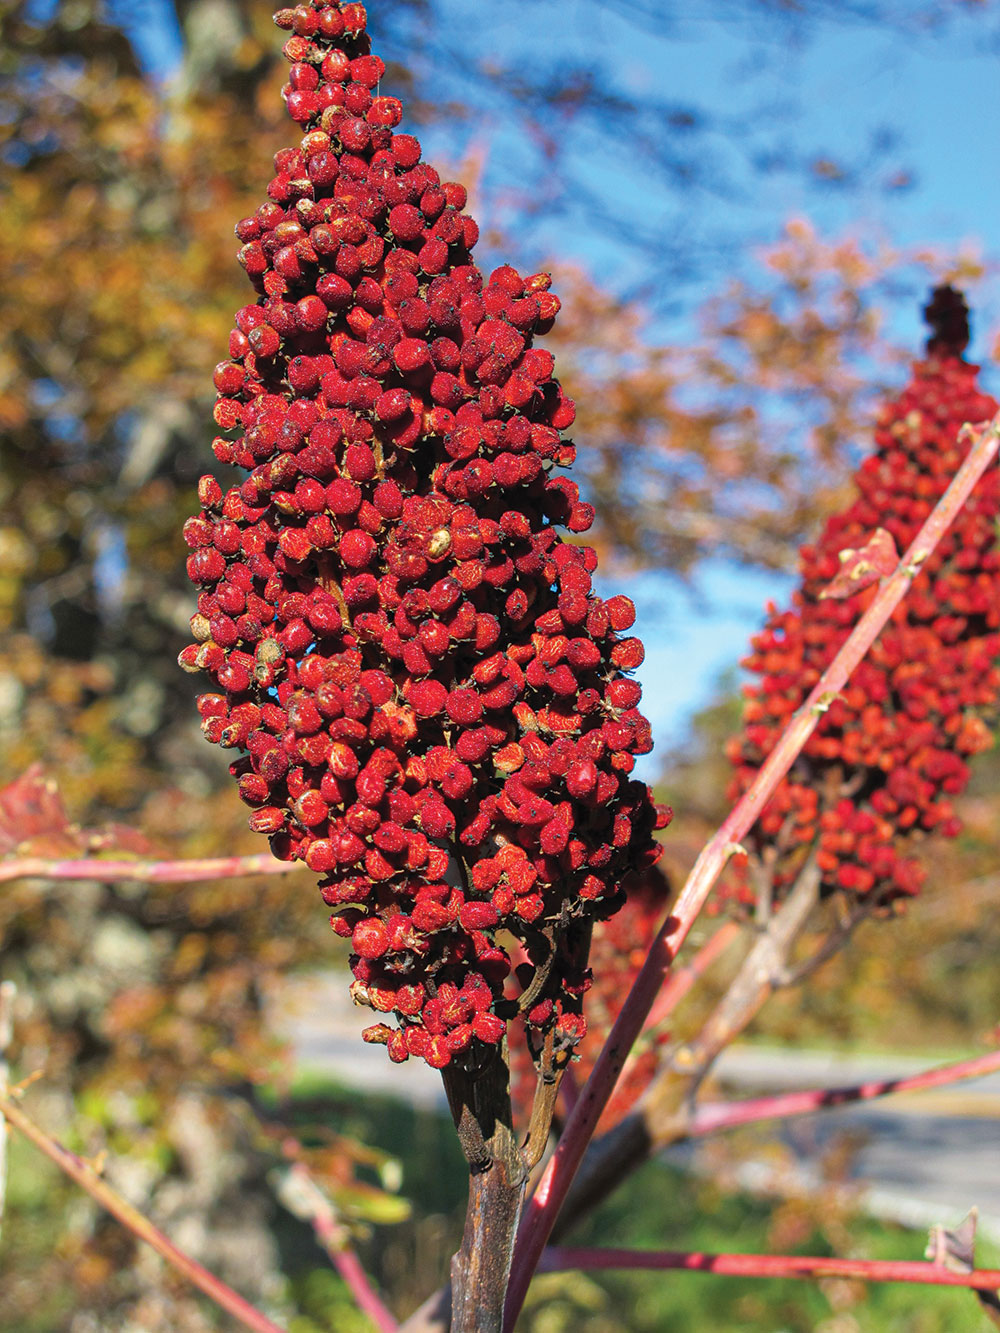 A ready-to-harvest seed cluster of the staghorn sumac